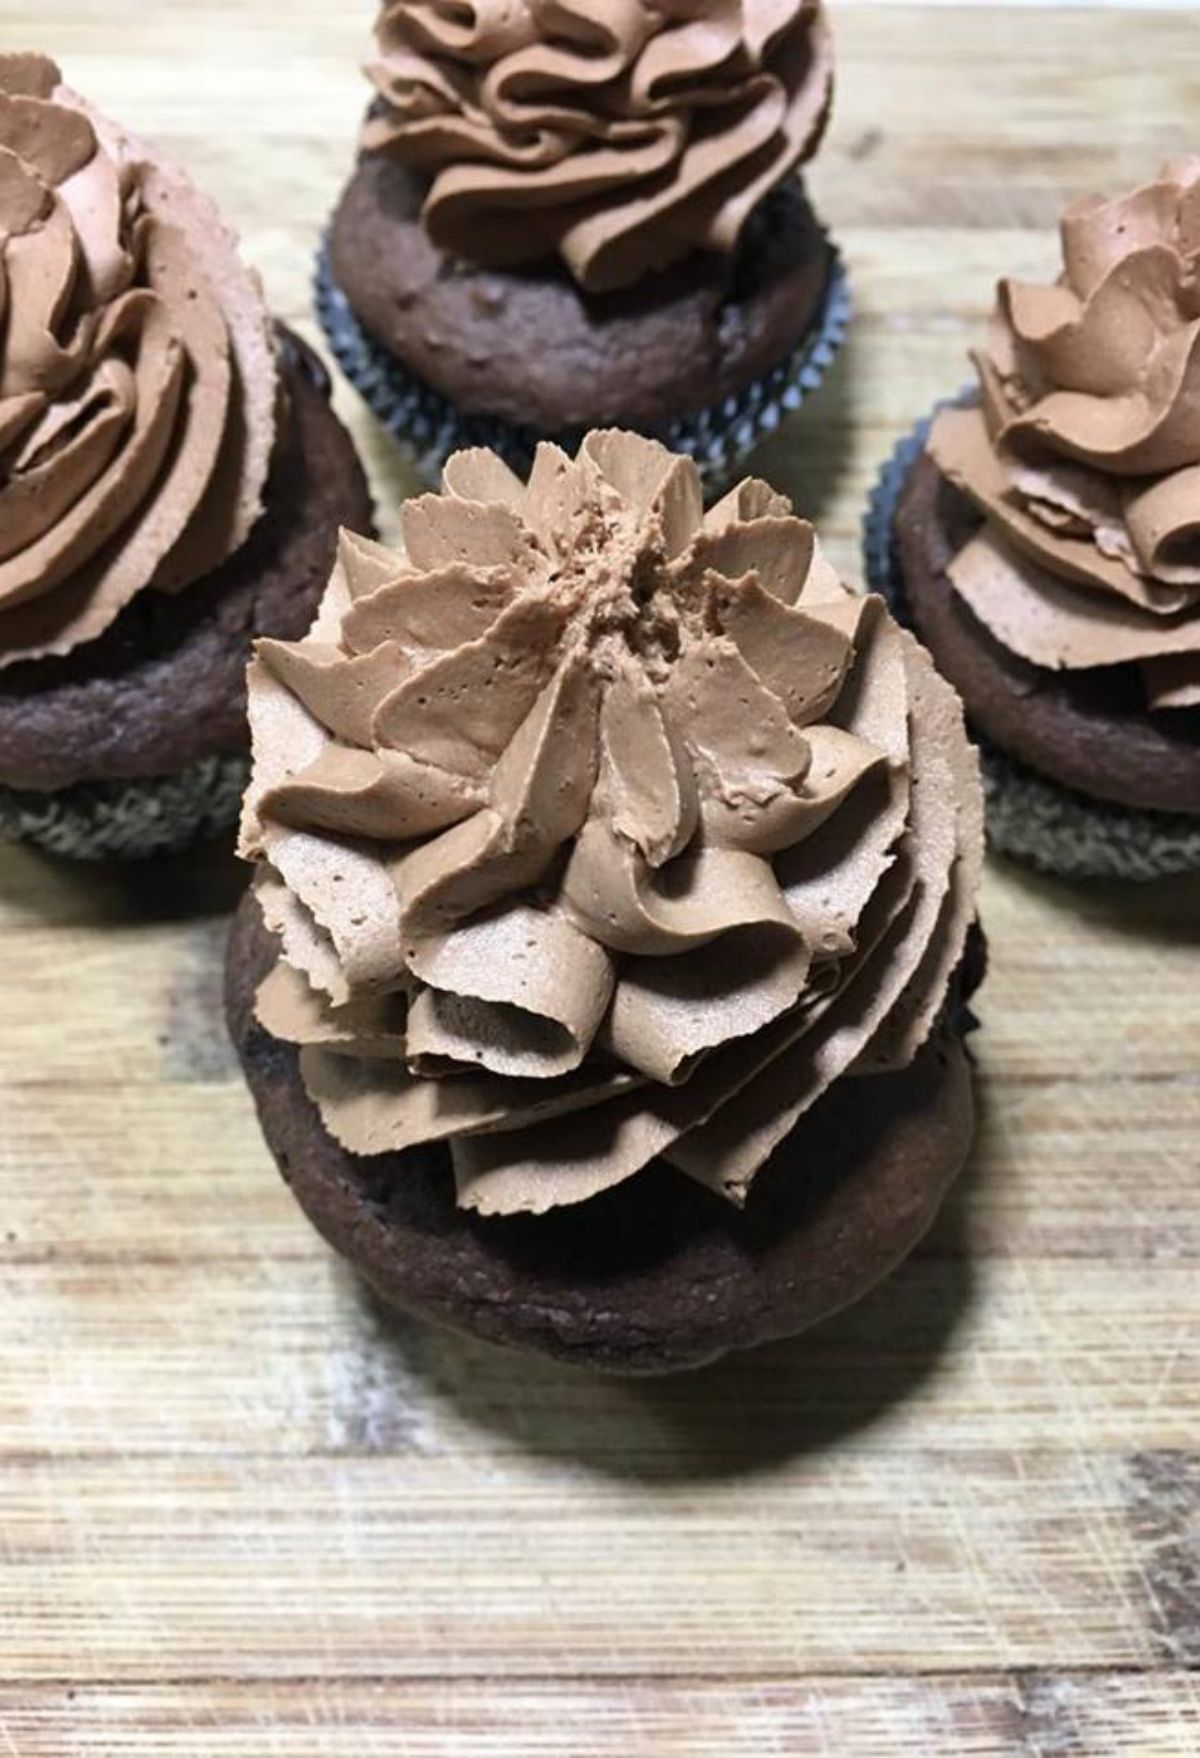 Chocolate cupcakes with chocolate frosting on a wooden cutting board.